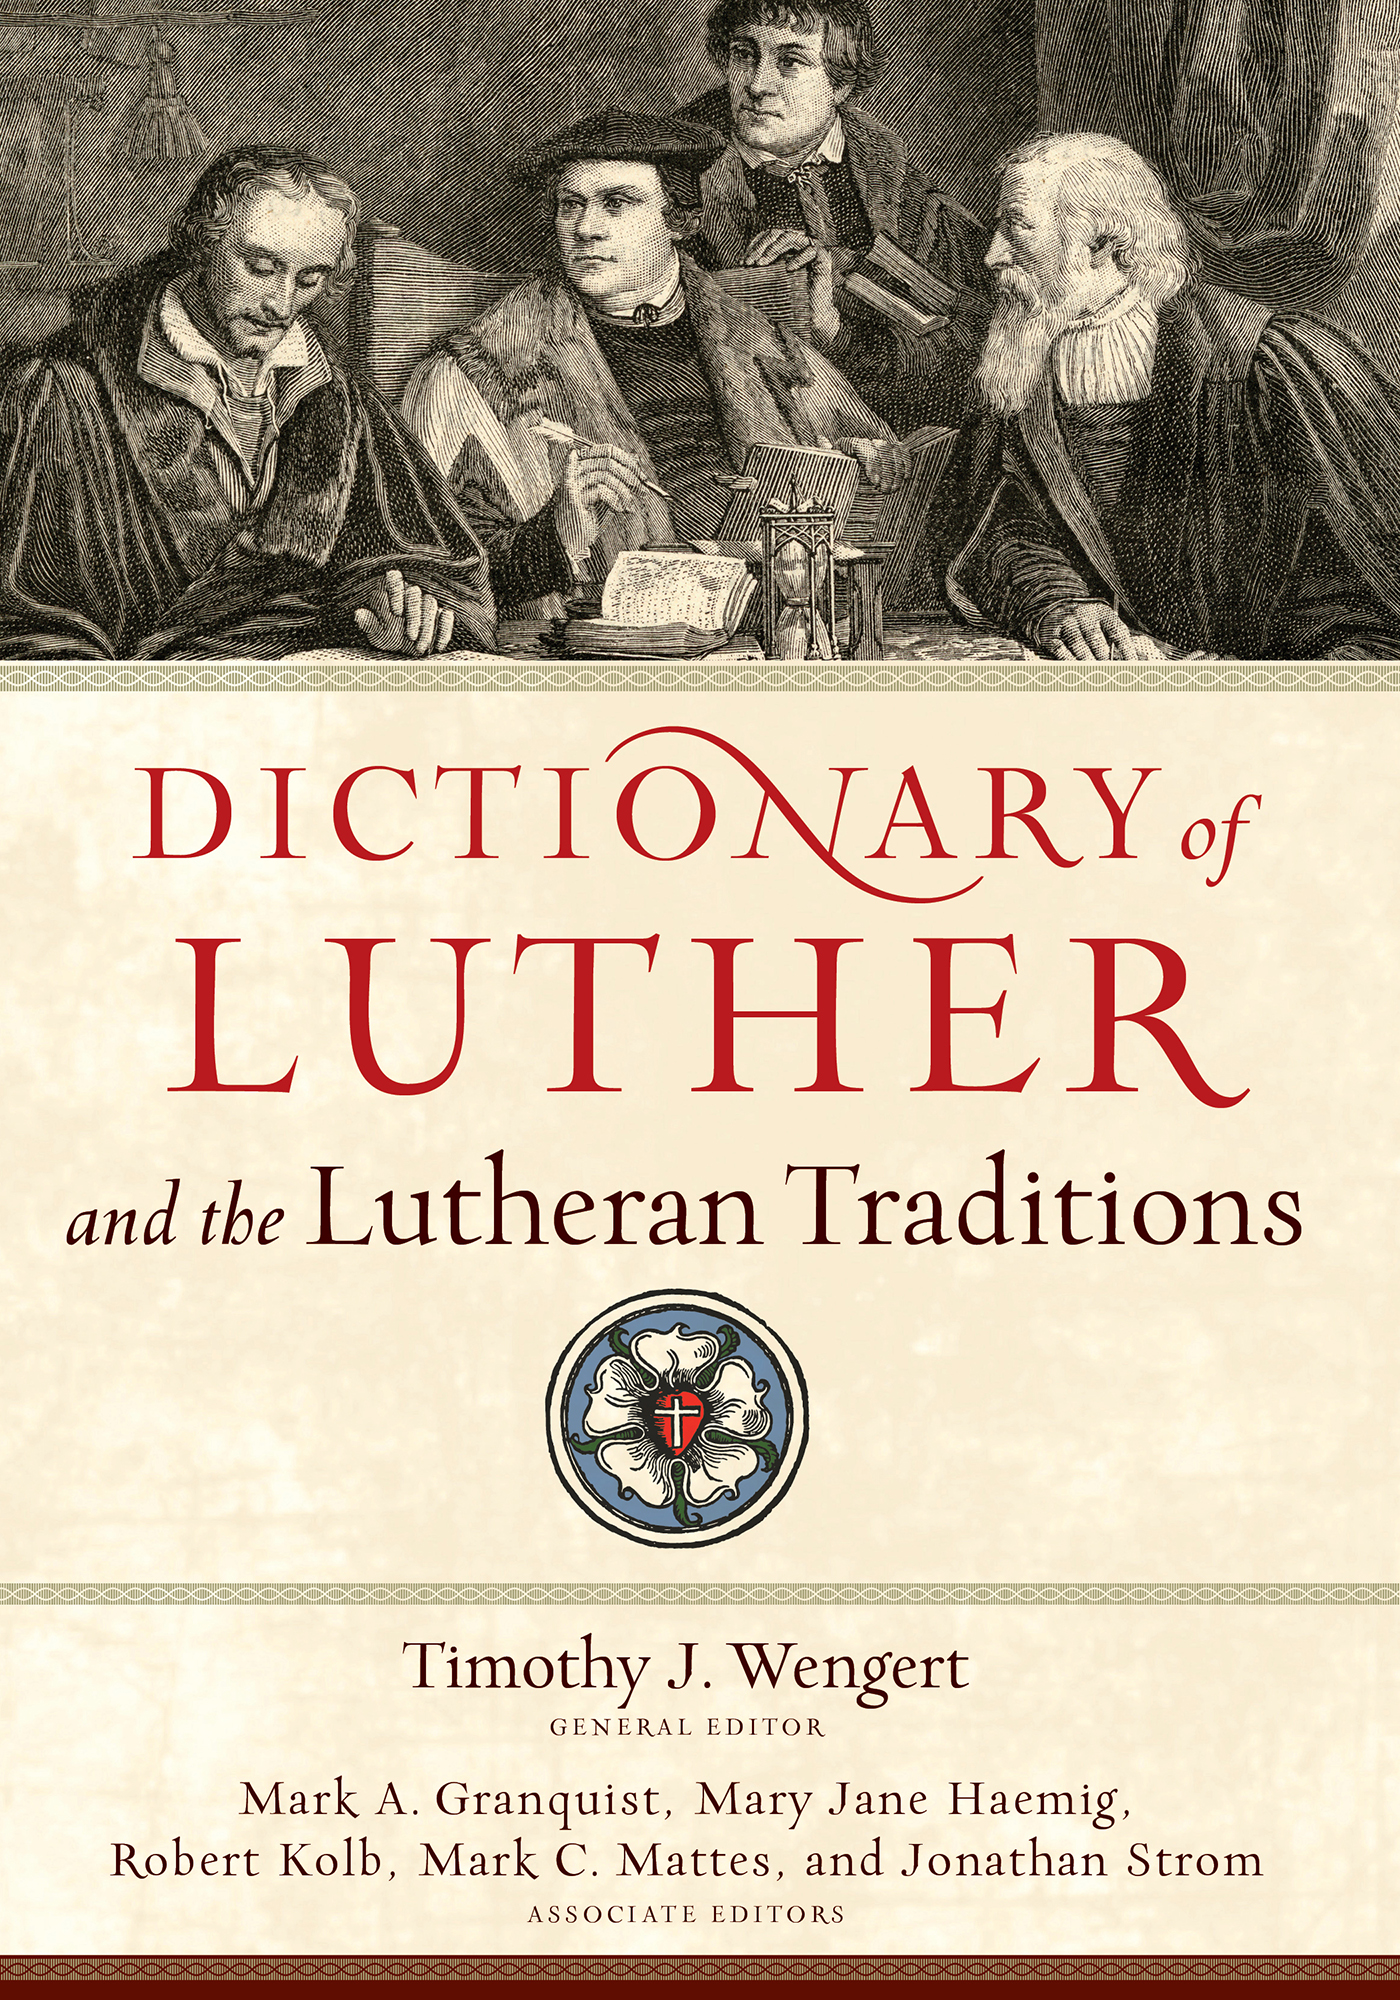 Dictionary of Luther and the Lutheran Traditions